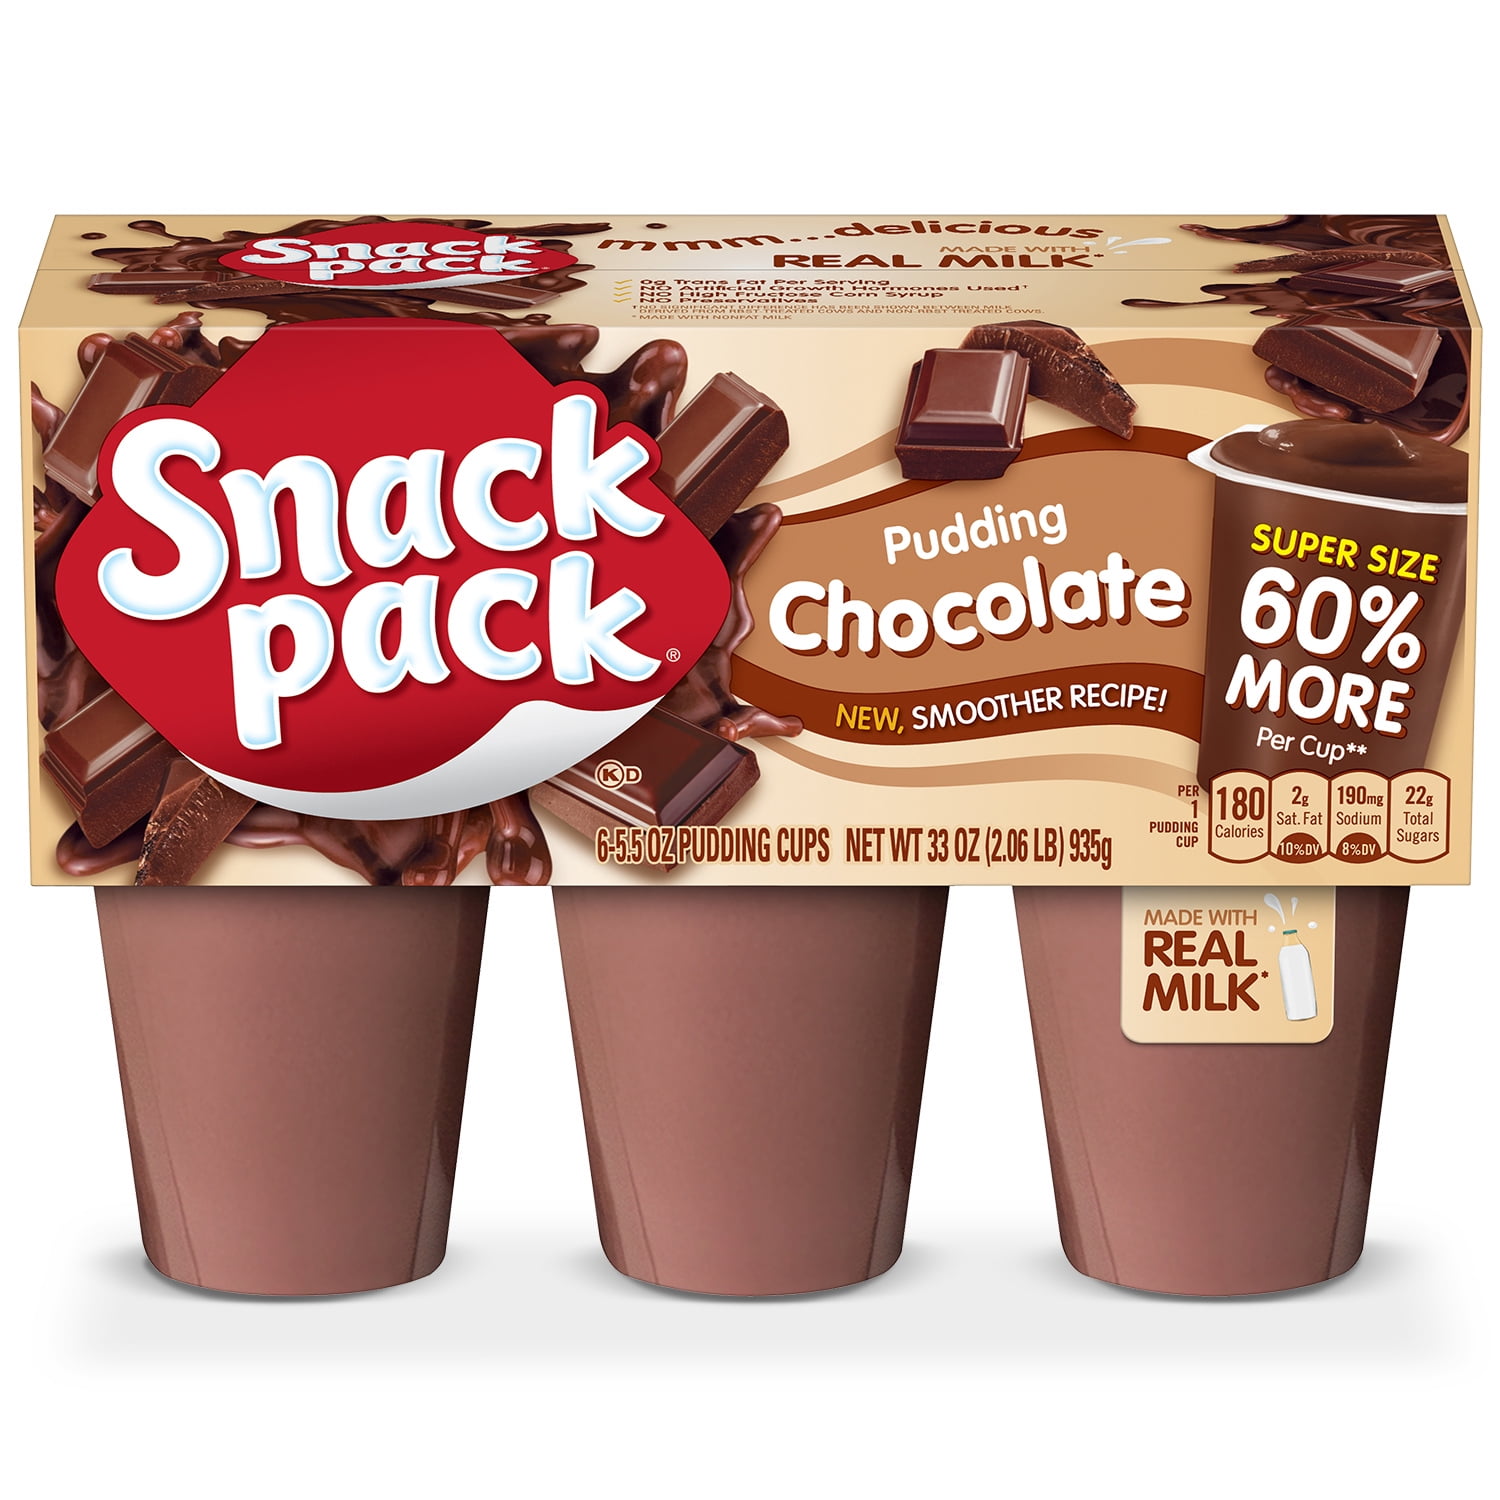 Snack Pack Chocolate Flavored Pudding 6 Count Pudding Cups 8 Pack 